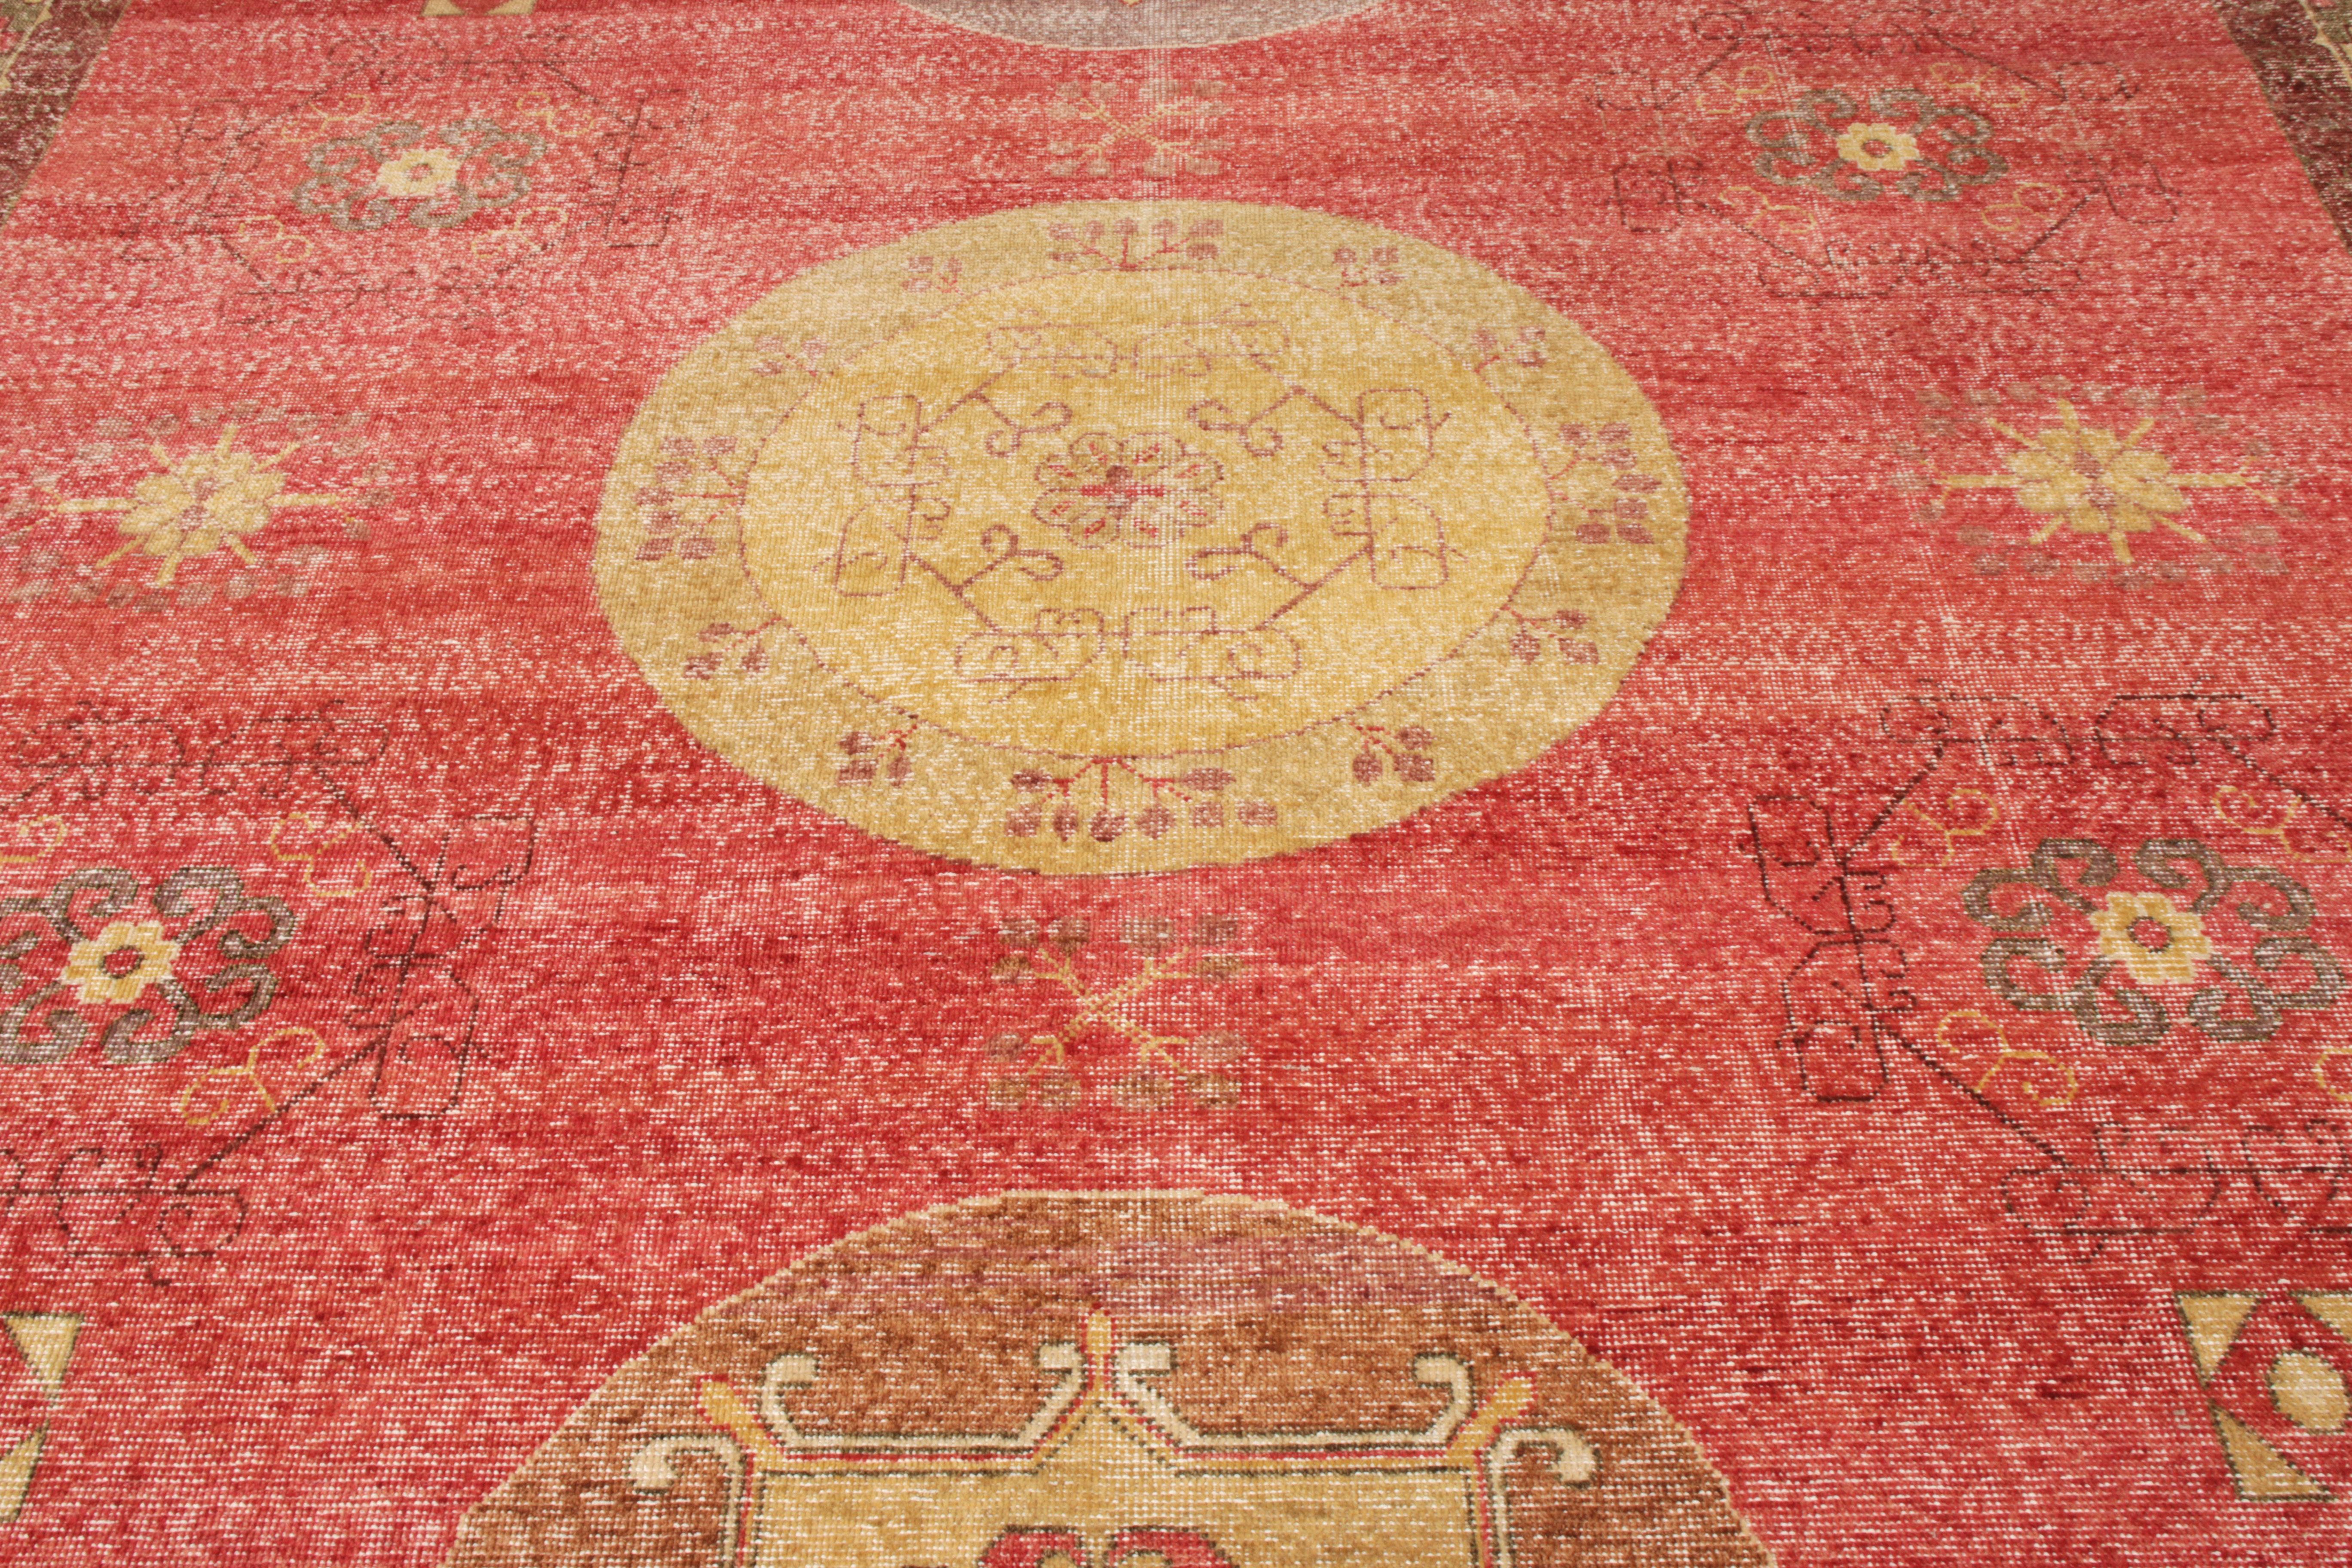 Hand-Knotted Rug & Kilim’s Distressed Khotan Style Rug in Red, Beige Medallion Pattern For Sale